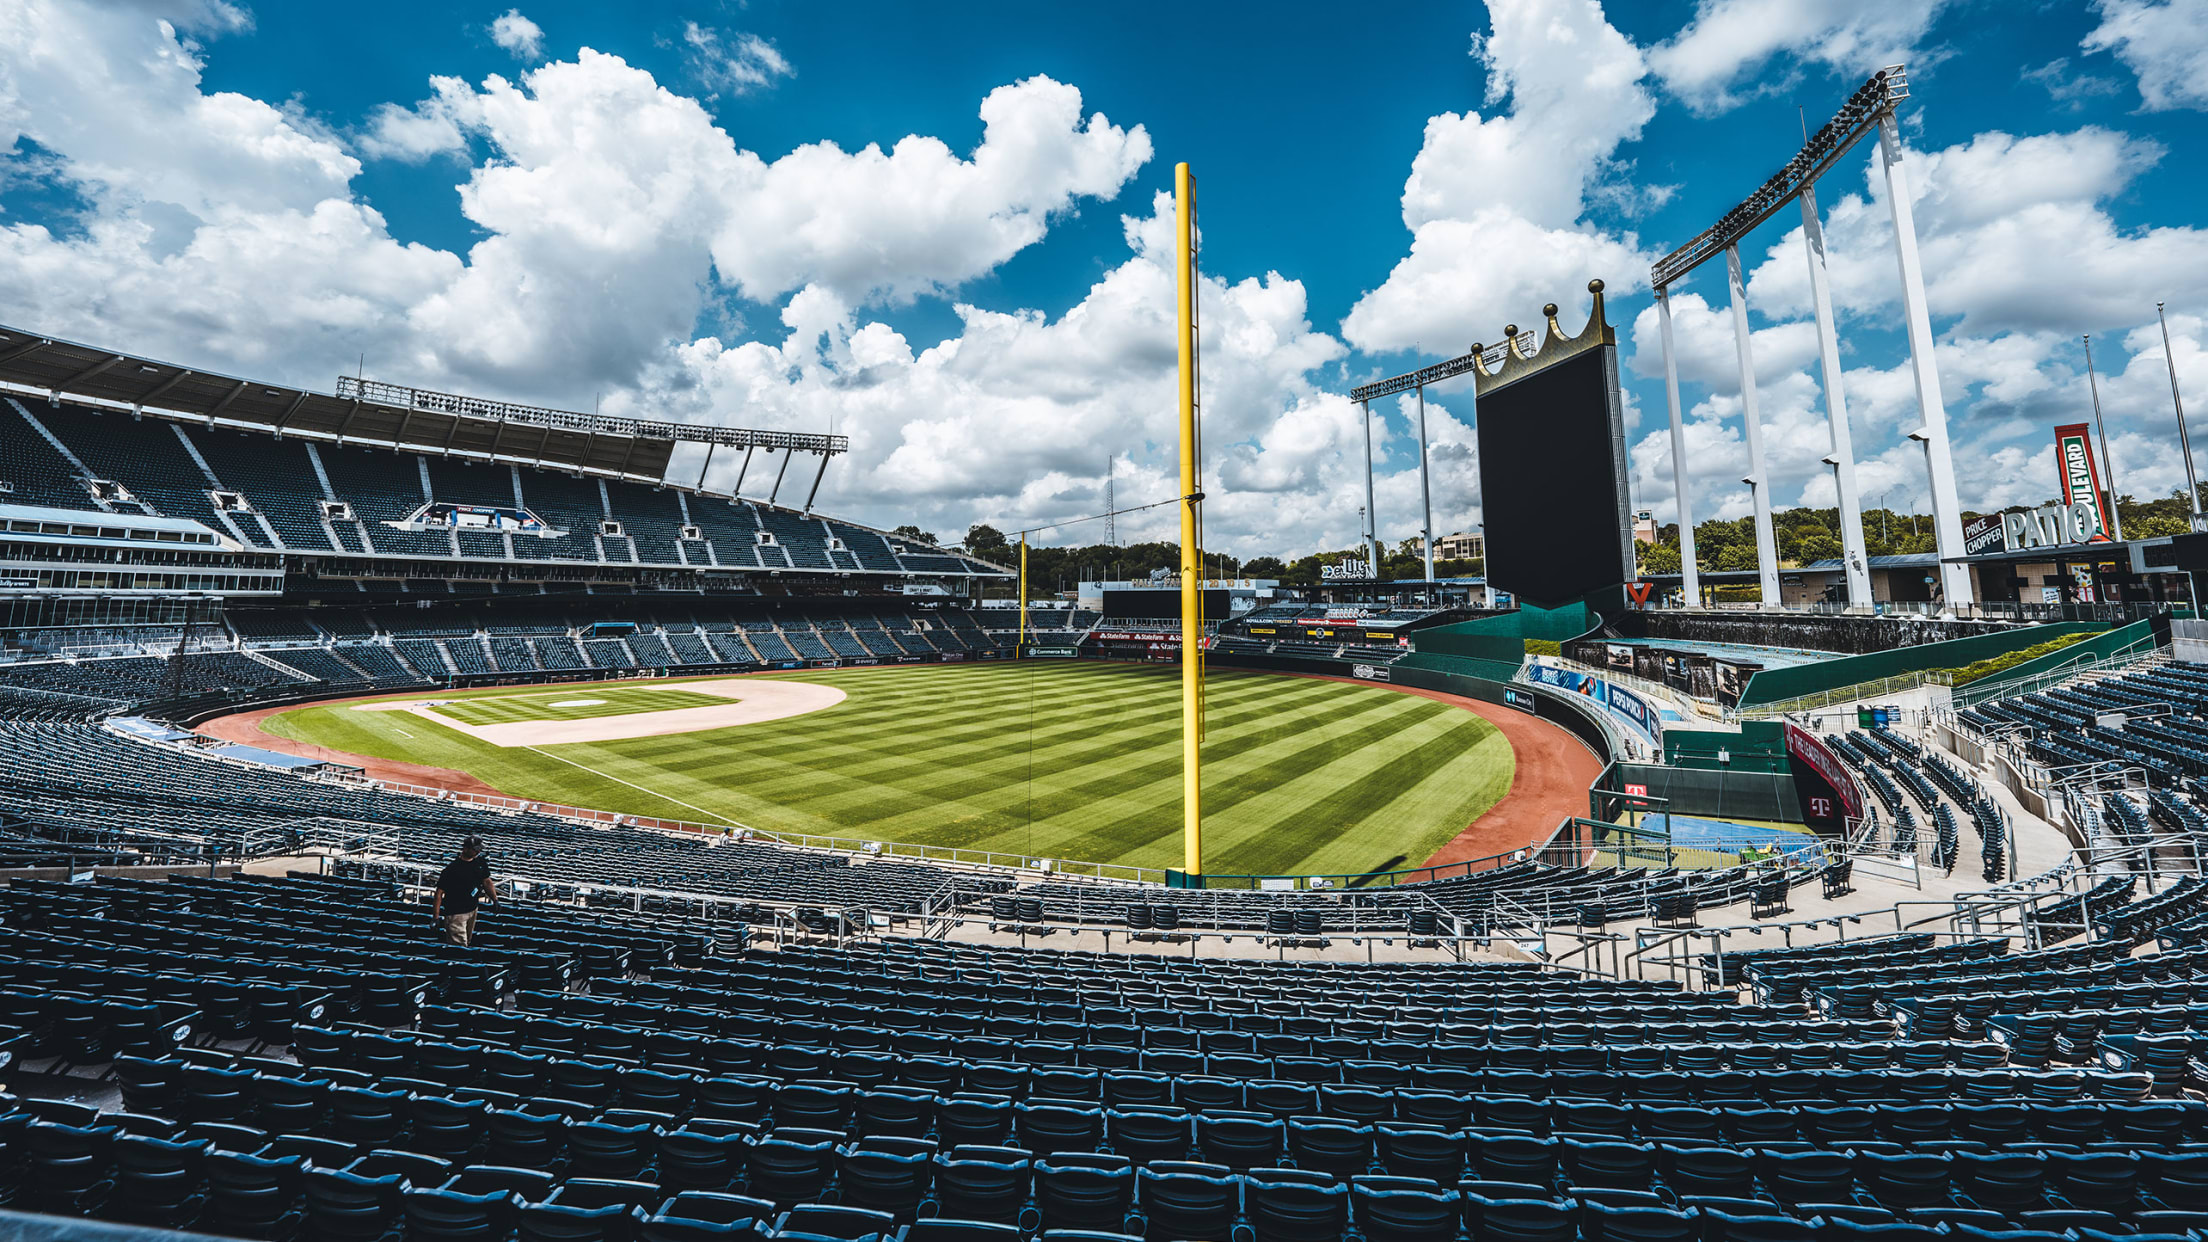 Royals Opening Day: A fan guide to Kauffman Stadium